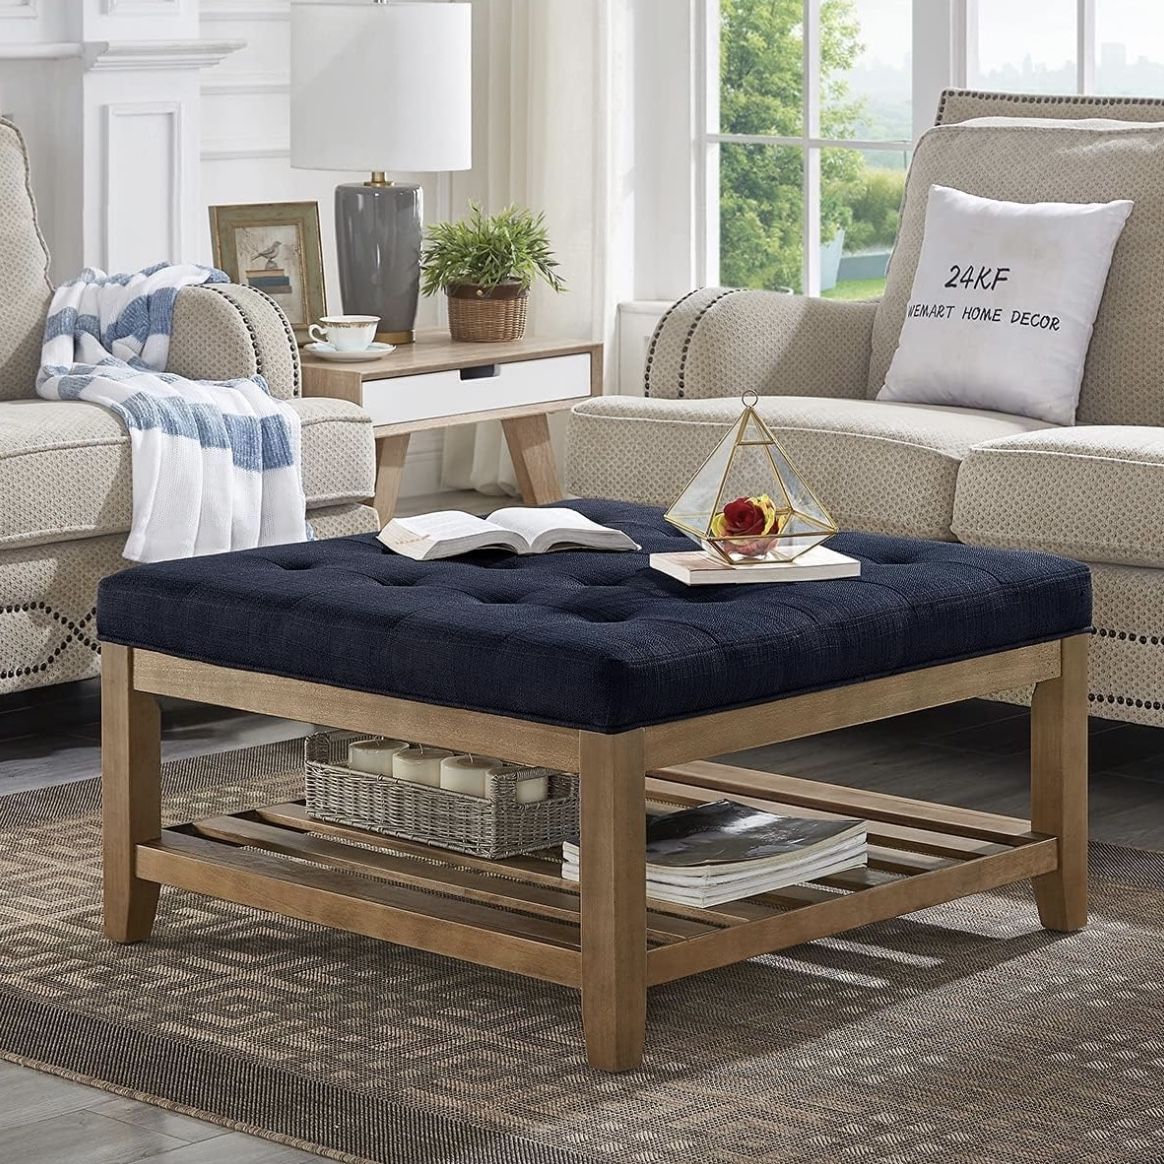 B-98 24KF Large Square Upholstered Tufted Linen Ottoman, Large Footrest Ottoman with Solid Wood Shelf- Navy Blue